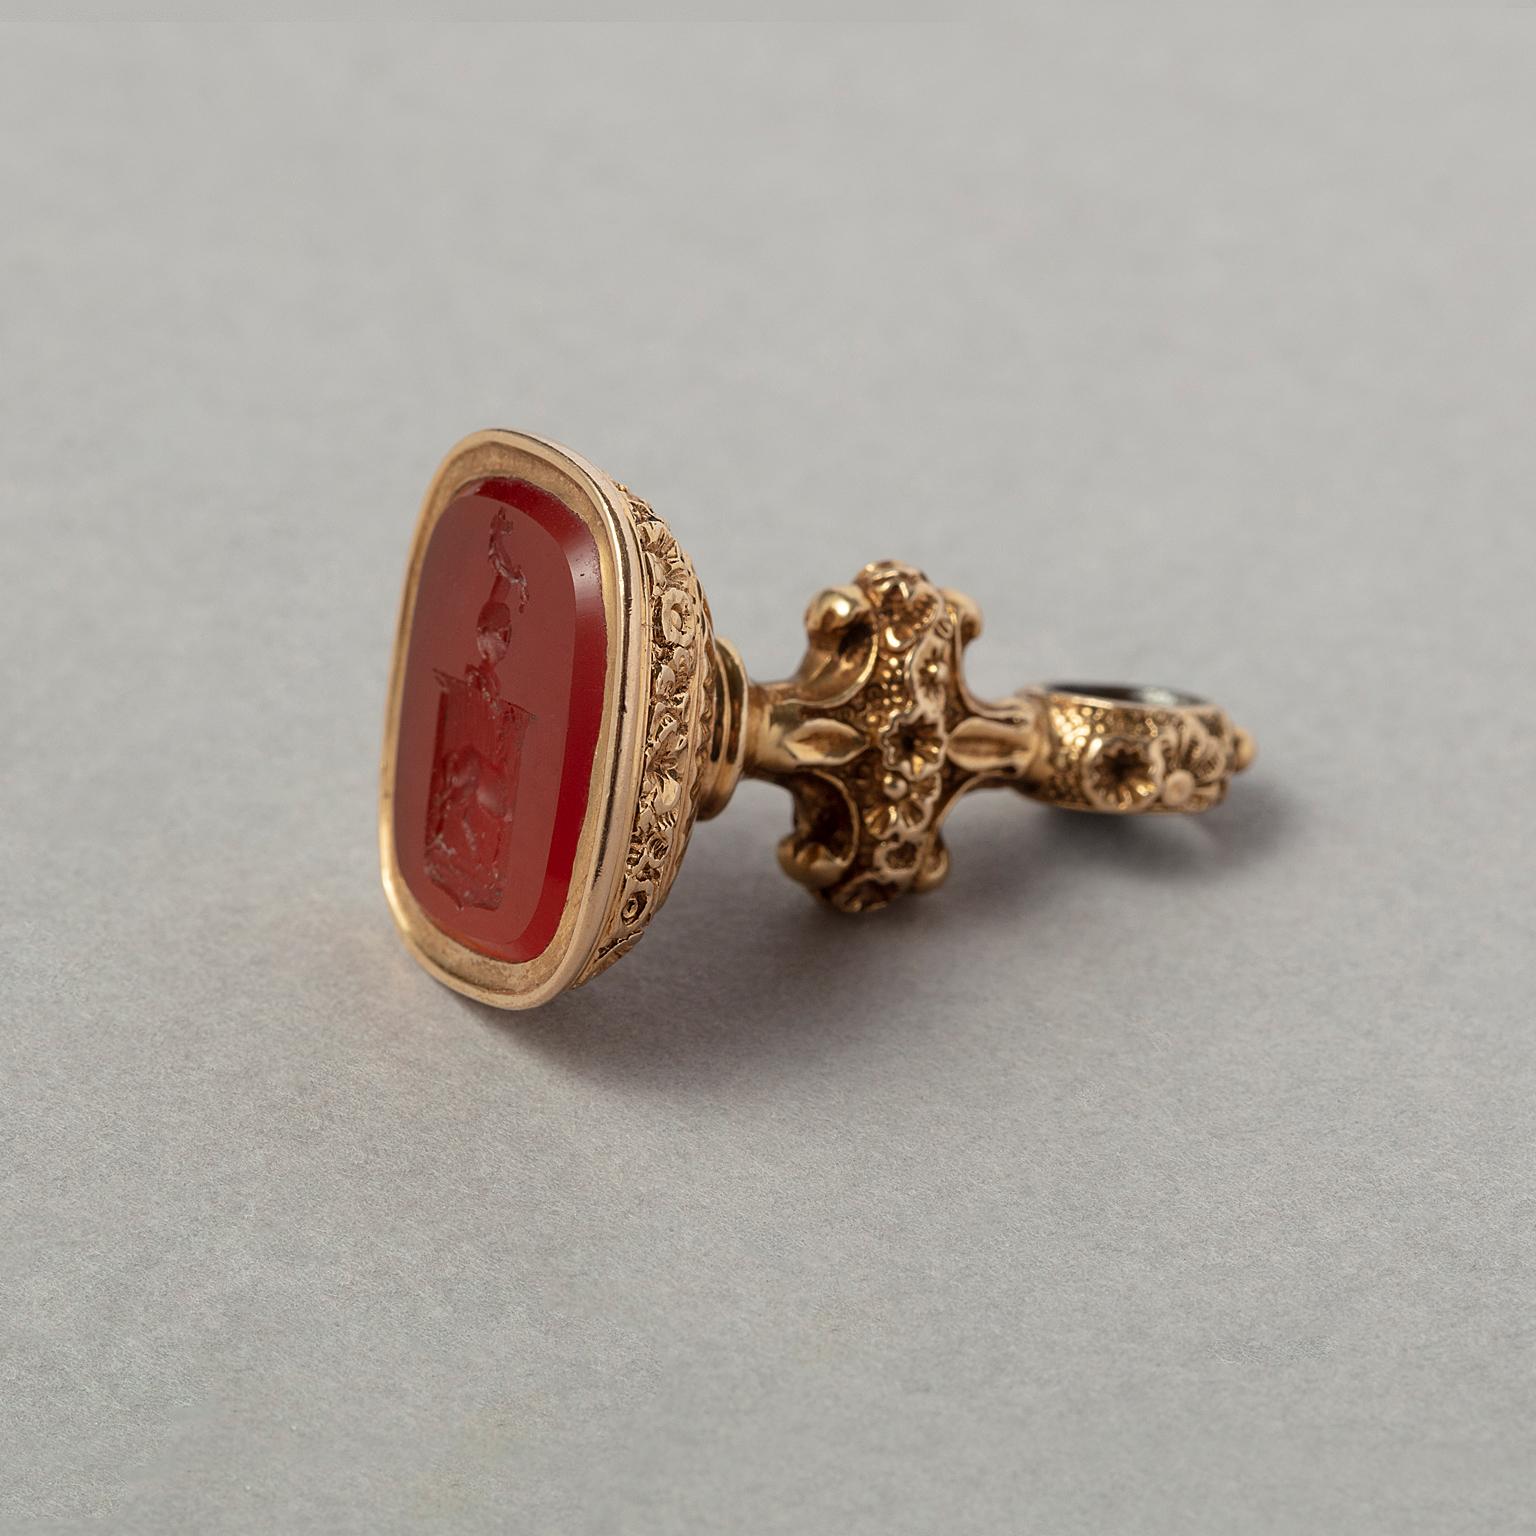 An 18 carat yellow  gold fob seal lavishly decorated with flowers set with a carnelian seal with a coat of arms featuring a helm with  a stepping horse and a crest with a staggering horse.  European, 19th century.

weight: 12 grams
dimensions